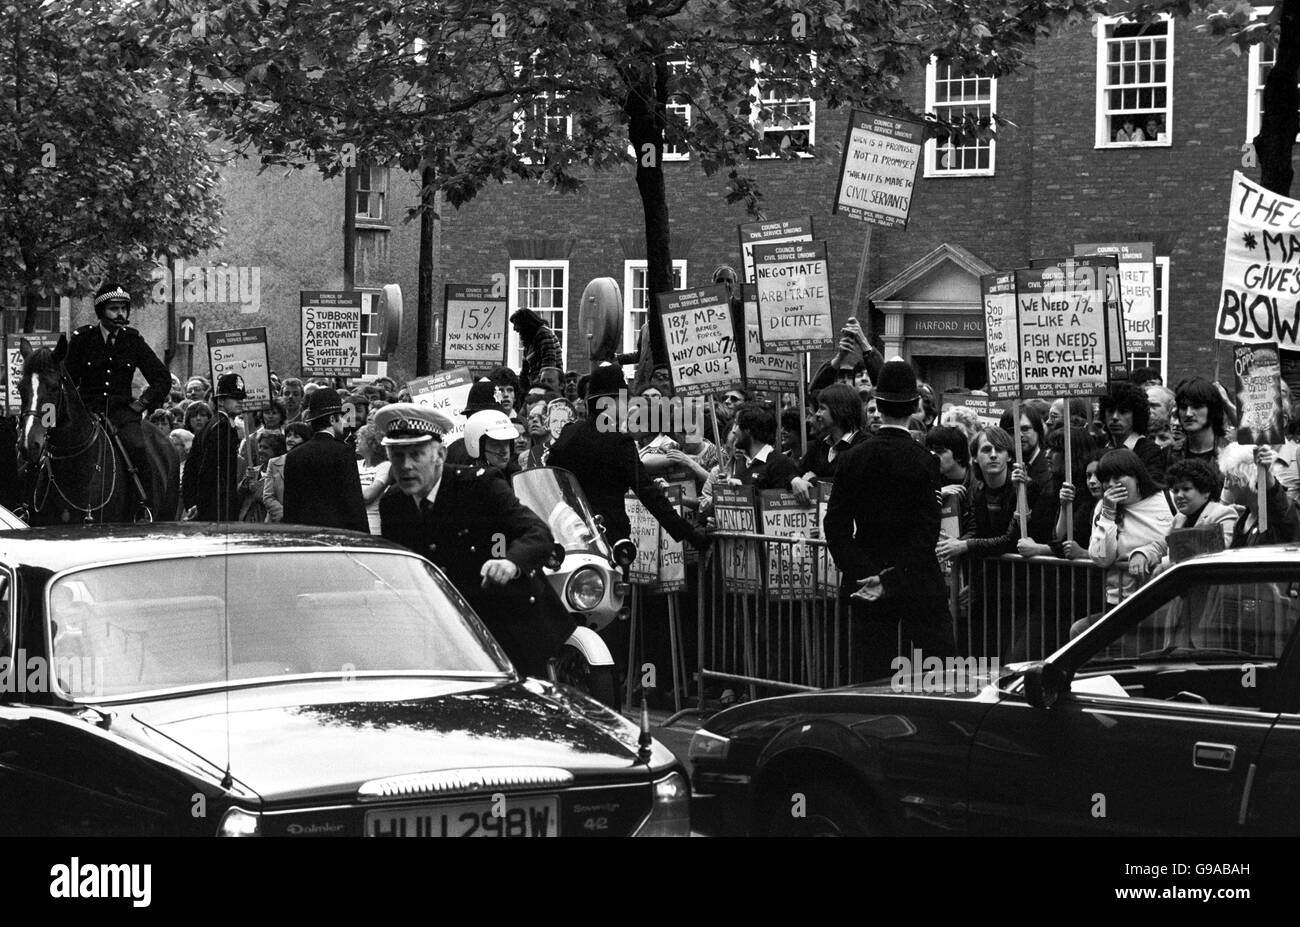 The Prime Minister's car after three eggs were thrown when Margaret Thatcher arrived at a reception for party workers. Police arrested three men and were booed by a crowd of jeering protesters as they led them away. Stock Photo